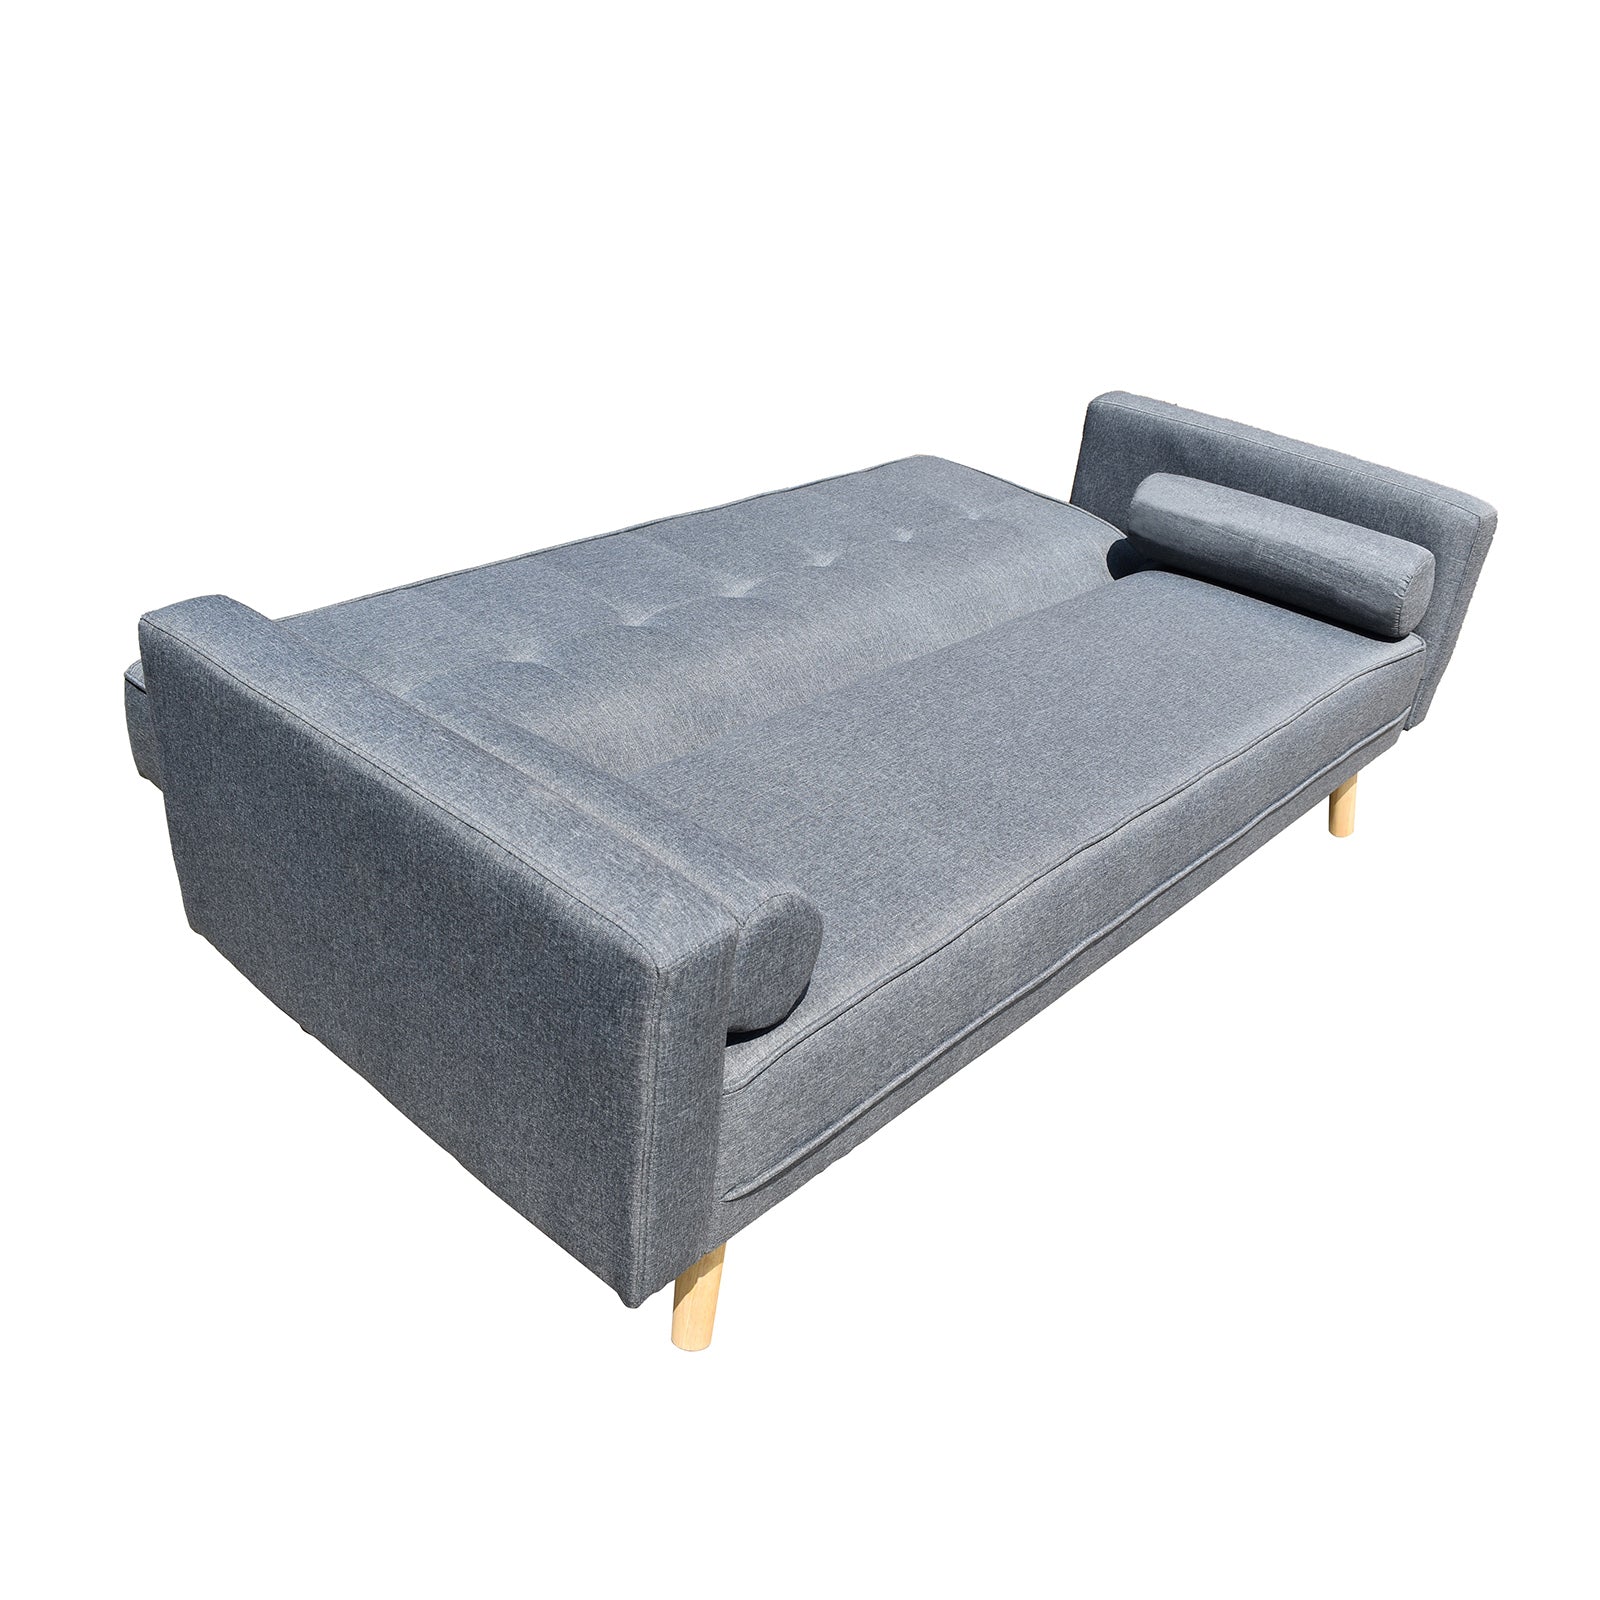 Casa Decor Sicily 2 in 1 Sofa Bed Charcoal 3 Seater Futon Couch Recliner.